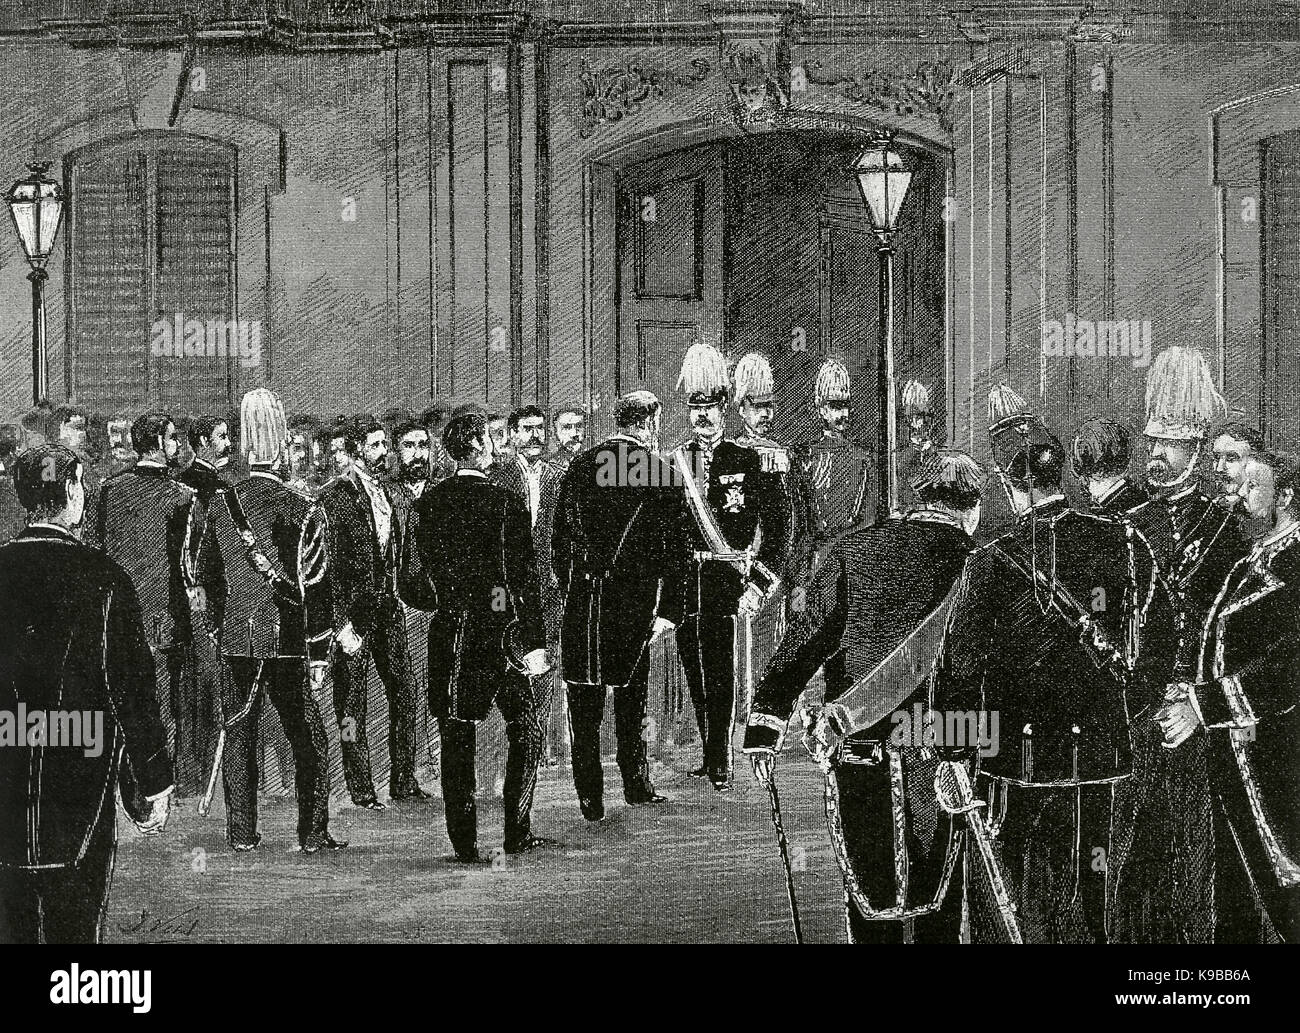 Spain. Catalonia. Barcelona. Universal Exhibition of 1888. The mayor of Barcelona, Francisco de Paula Rius i Taulet (1833-1889) offering the King Luis I of Portugal (1838-1889) the Royal Pavilion. Engraving by J. Vehil. 'The Iberian Illustration', 1888. Stock Photo